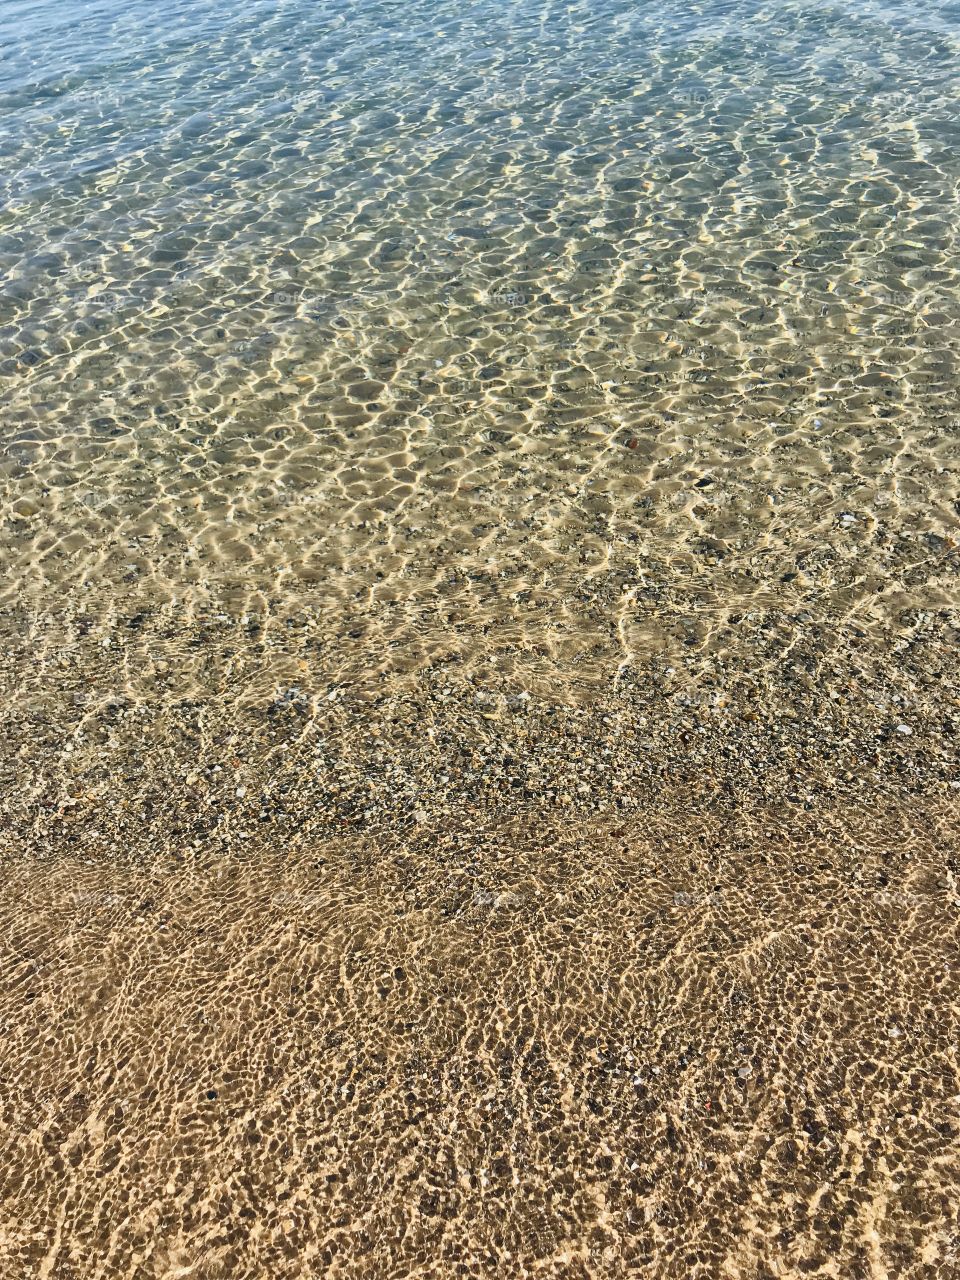 Clear water of one of our Great Lakes Lake Huron!